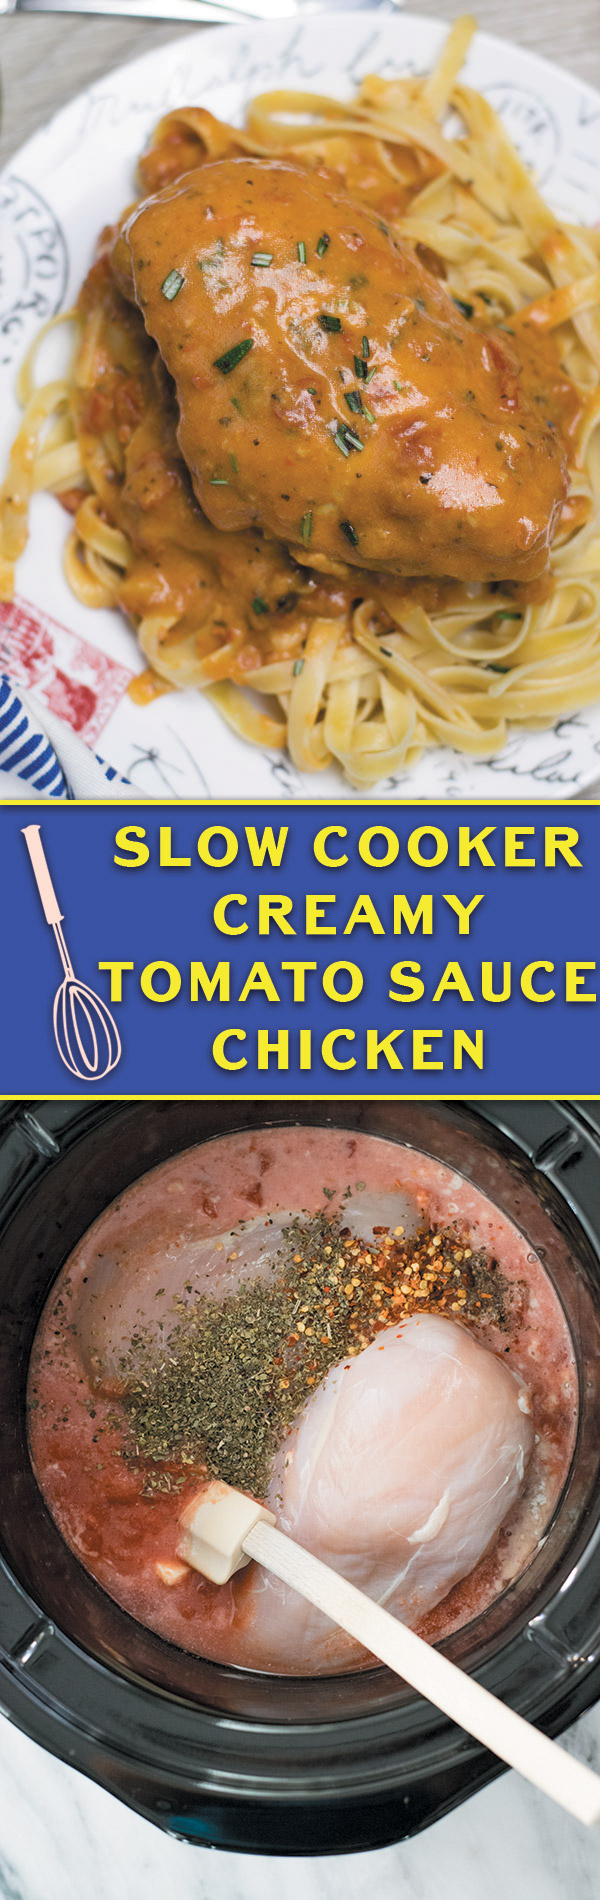 Slow Cooker Creamy Tomato Sauce Chicken : DUMP & FORGET this delicious creamy slow cooker tomato sauce chicken in the morning before work and come back to restaurant quality meal everyone will go crazy for!